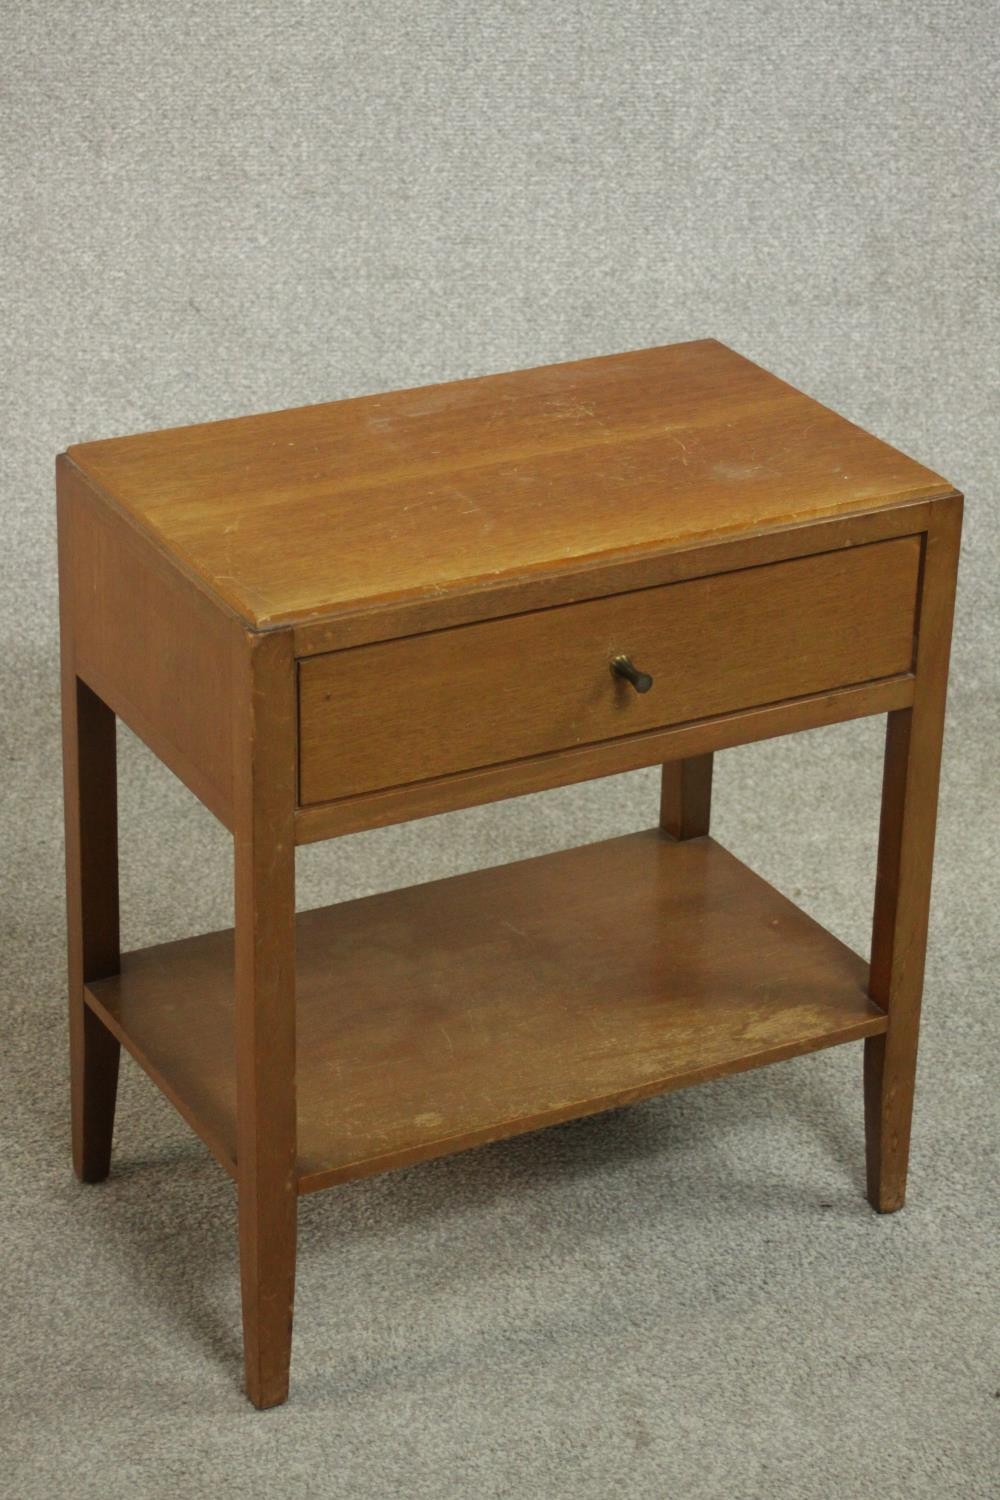 A mid 20th century Heal's style oak bedside table, with a single drawer over an undertier on - Image 3 of 4